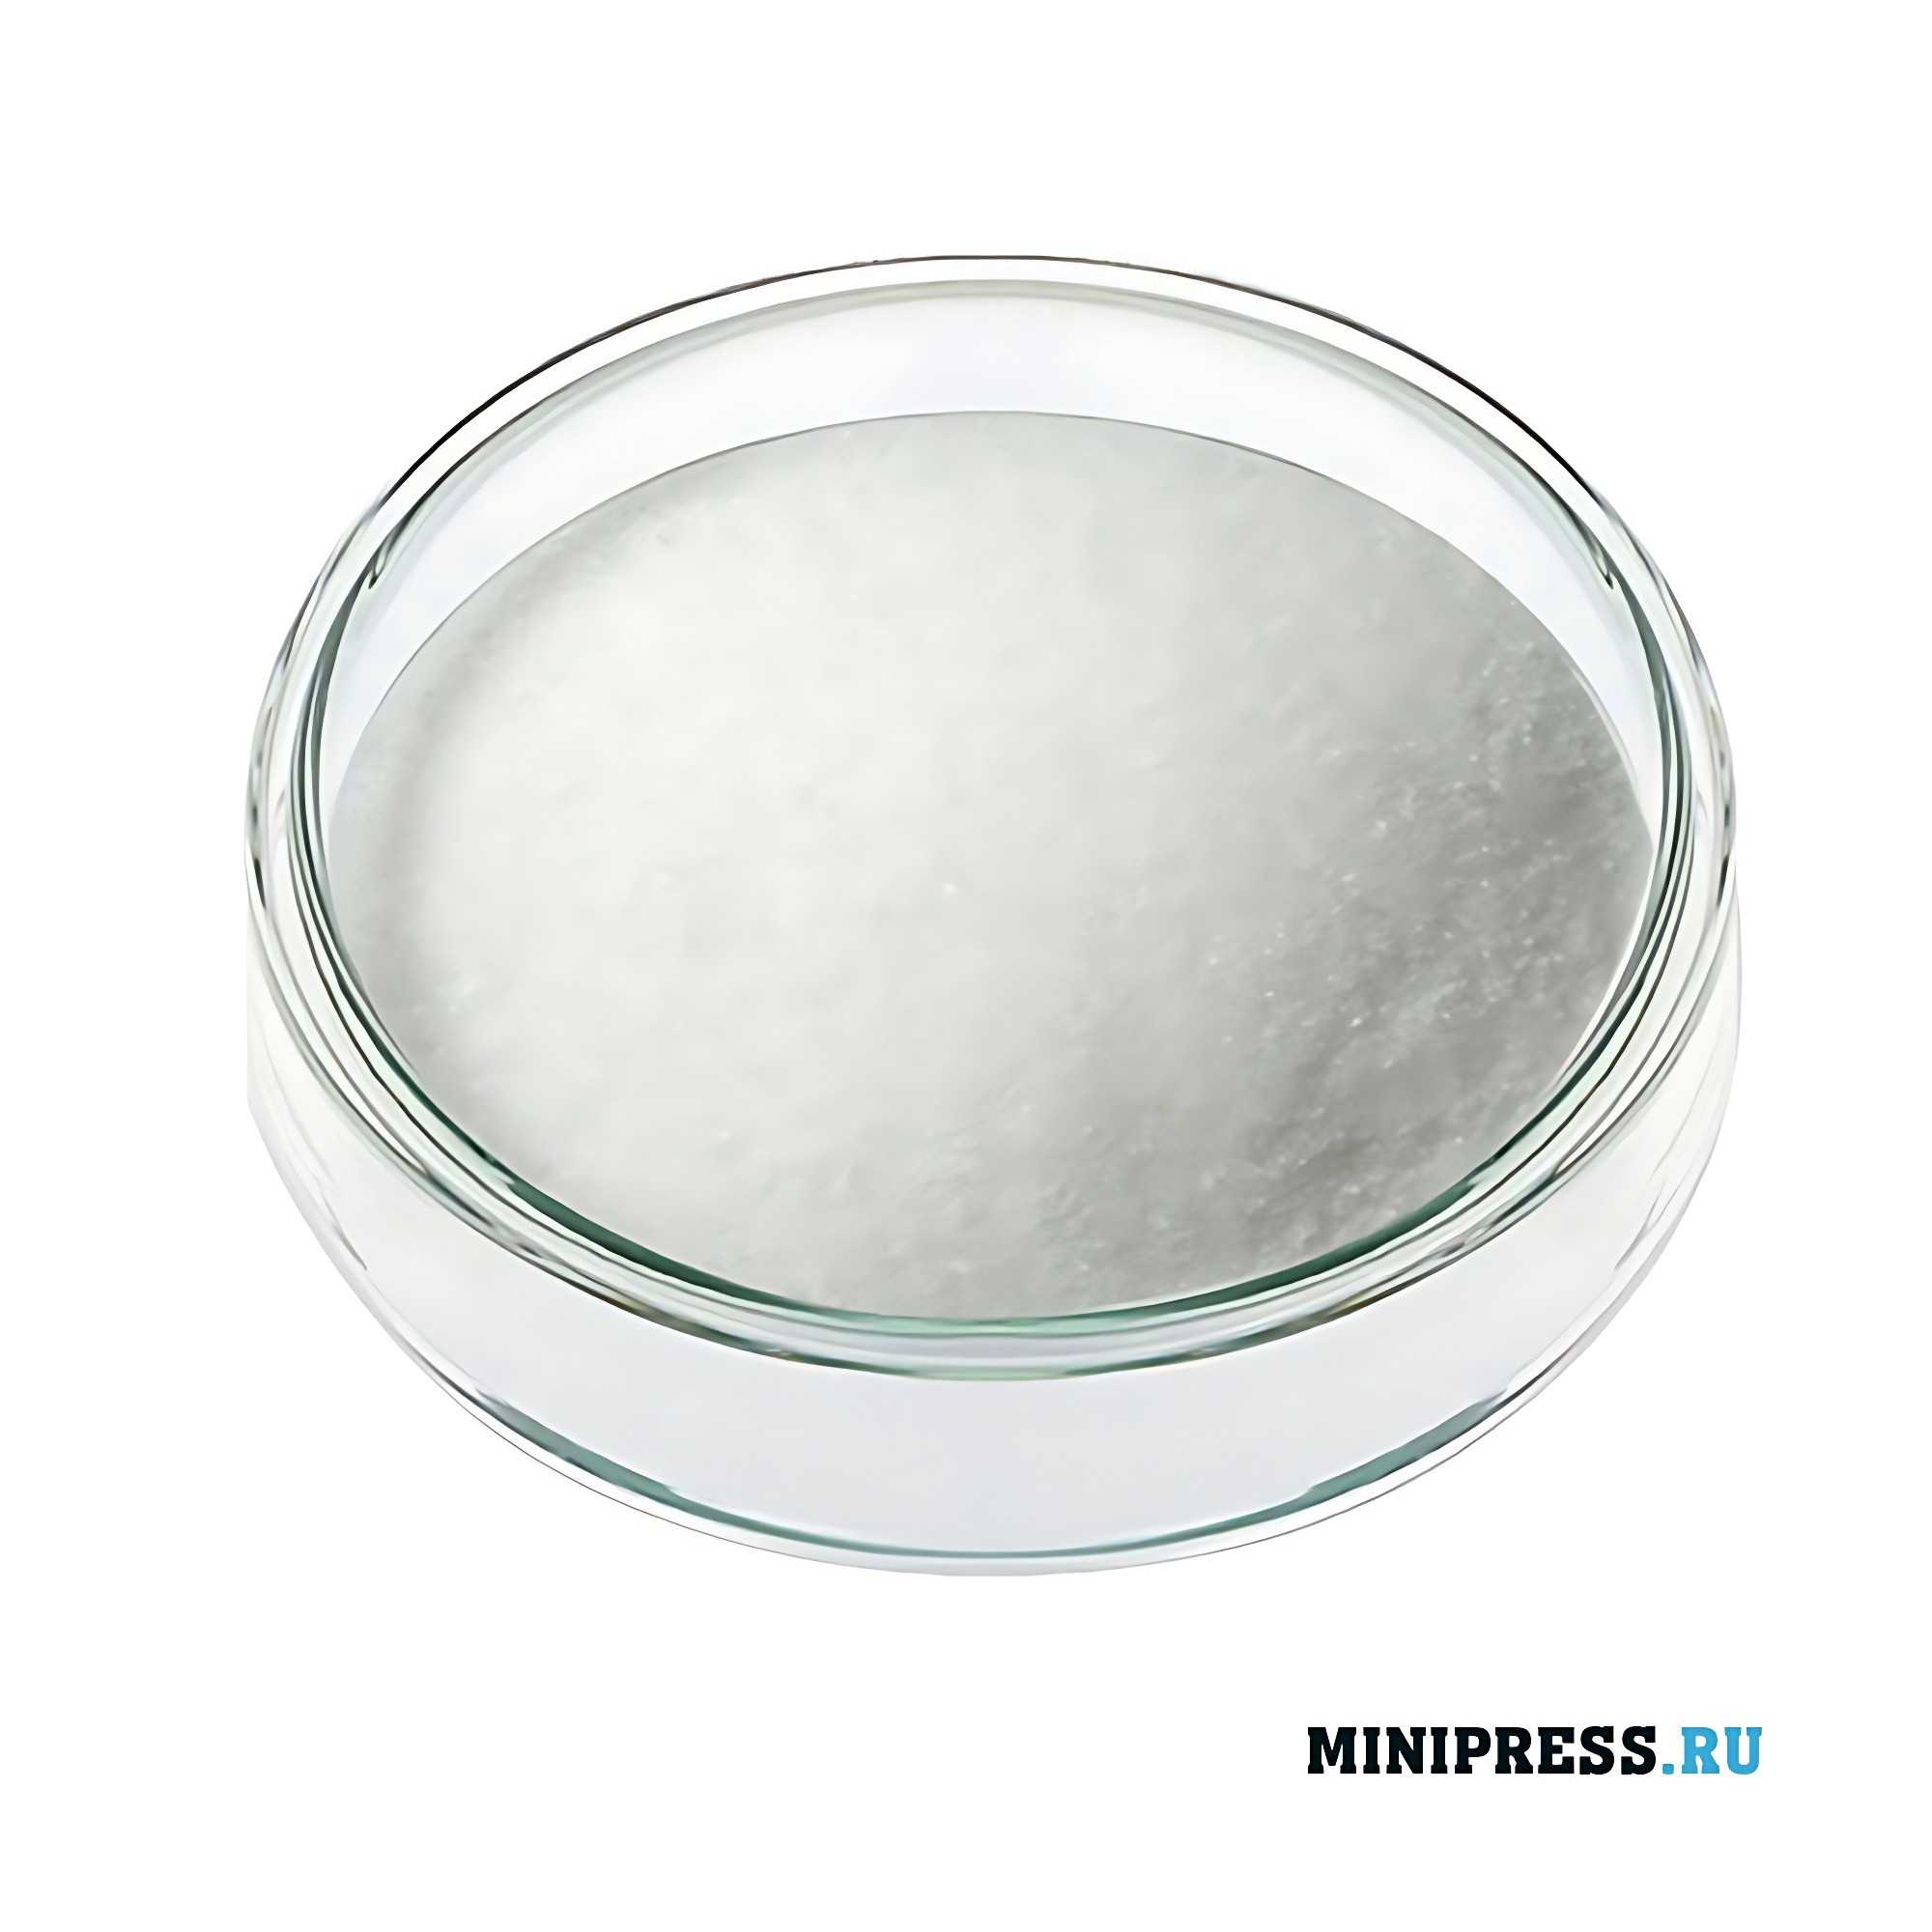 Industrial production of powders